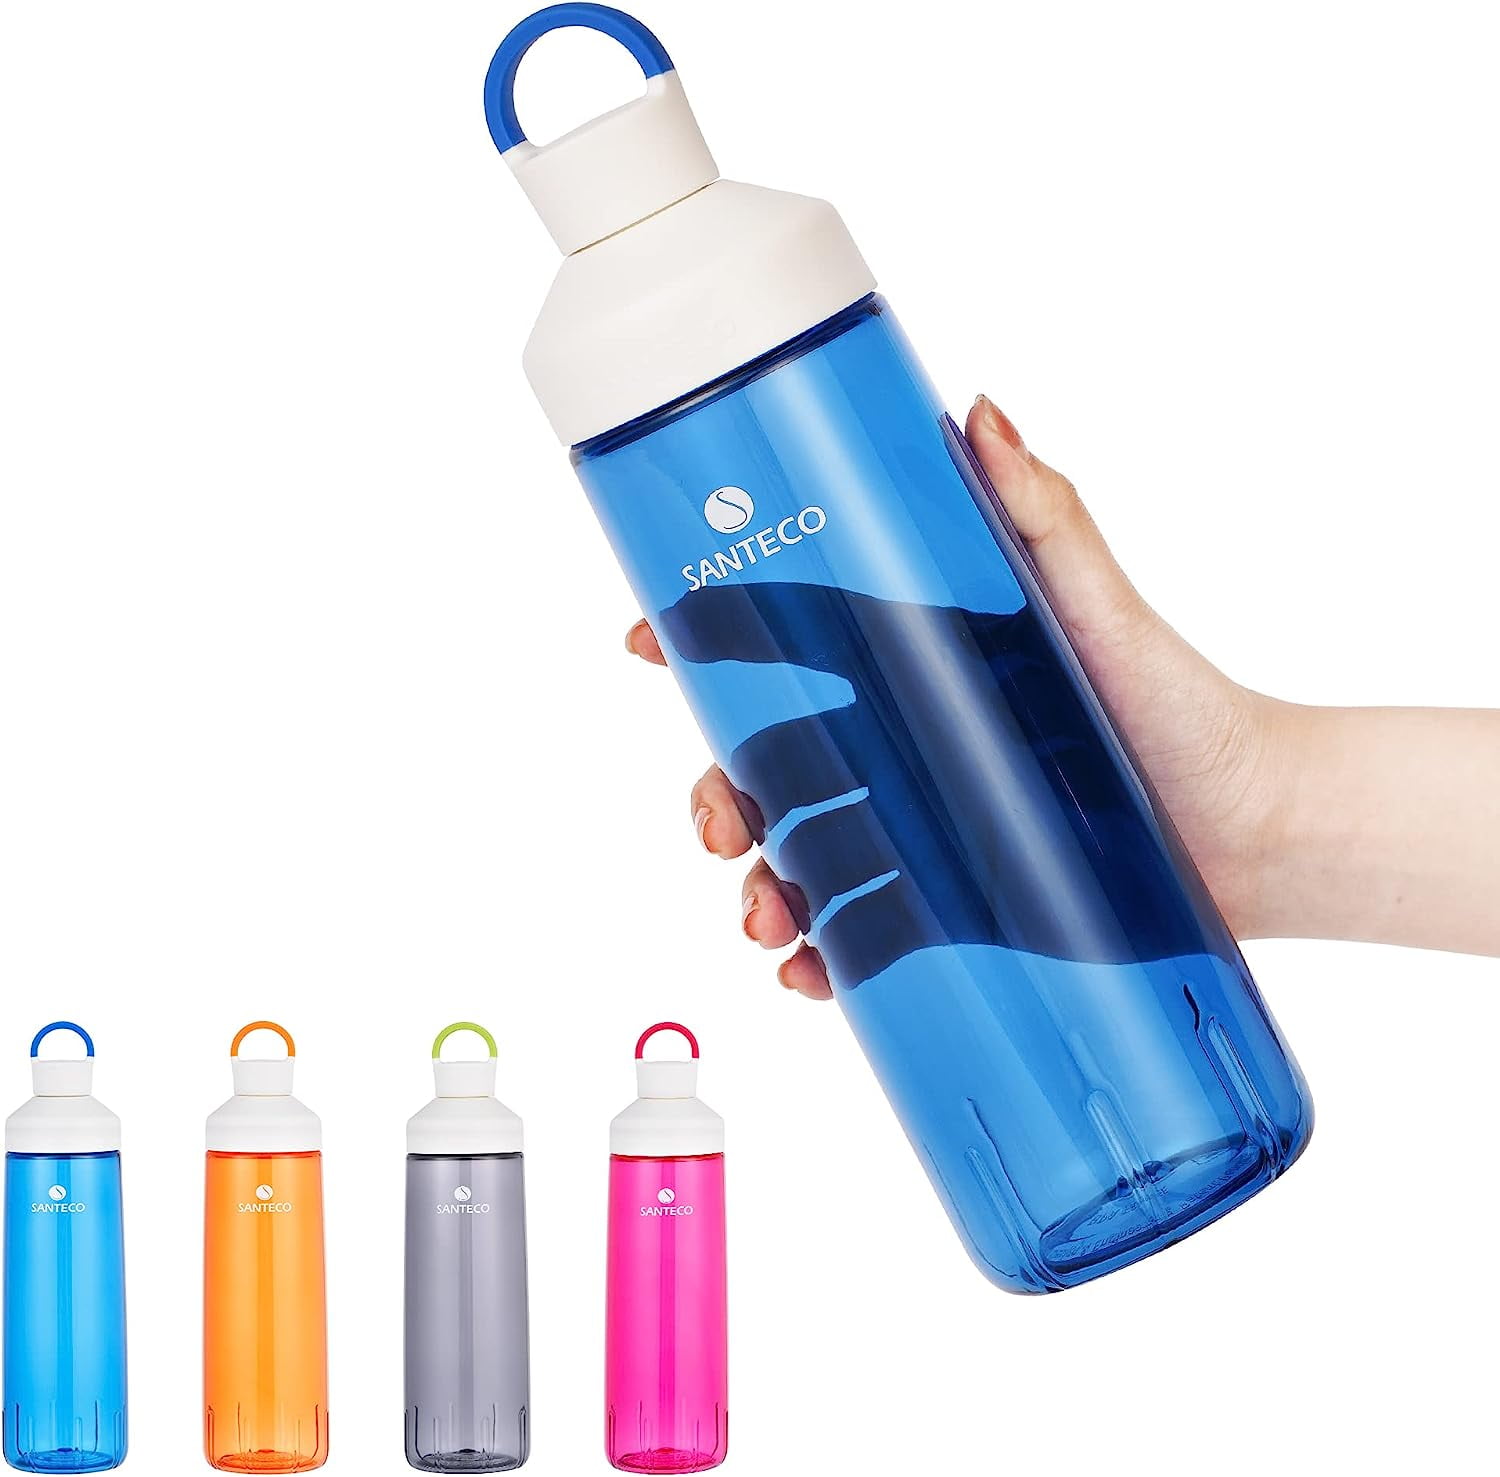 SANTECO Water Bottles, 32 oz Reusable Wide Mouth Sports Bottle, Easy to  Clean BPA Free Tritan, Double Wall Insulated Light Weight Bottles with  Handle for Daily Fitness, Gym, Running, Hiking 